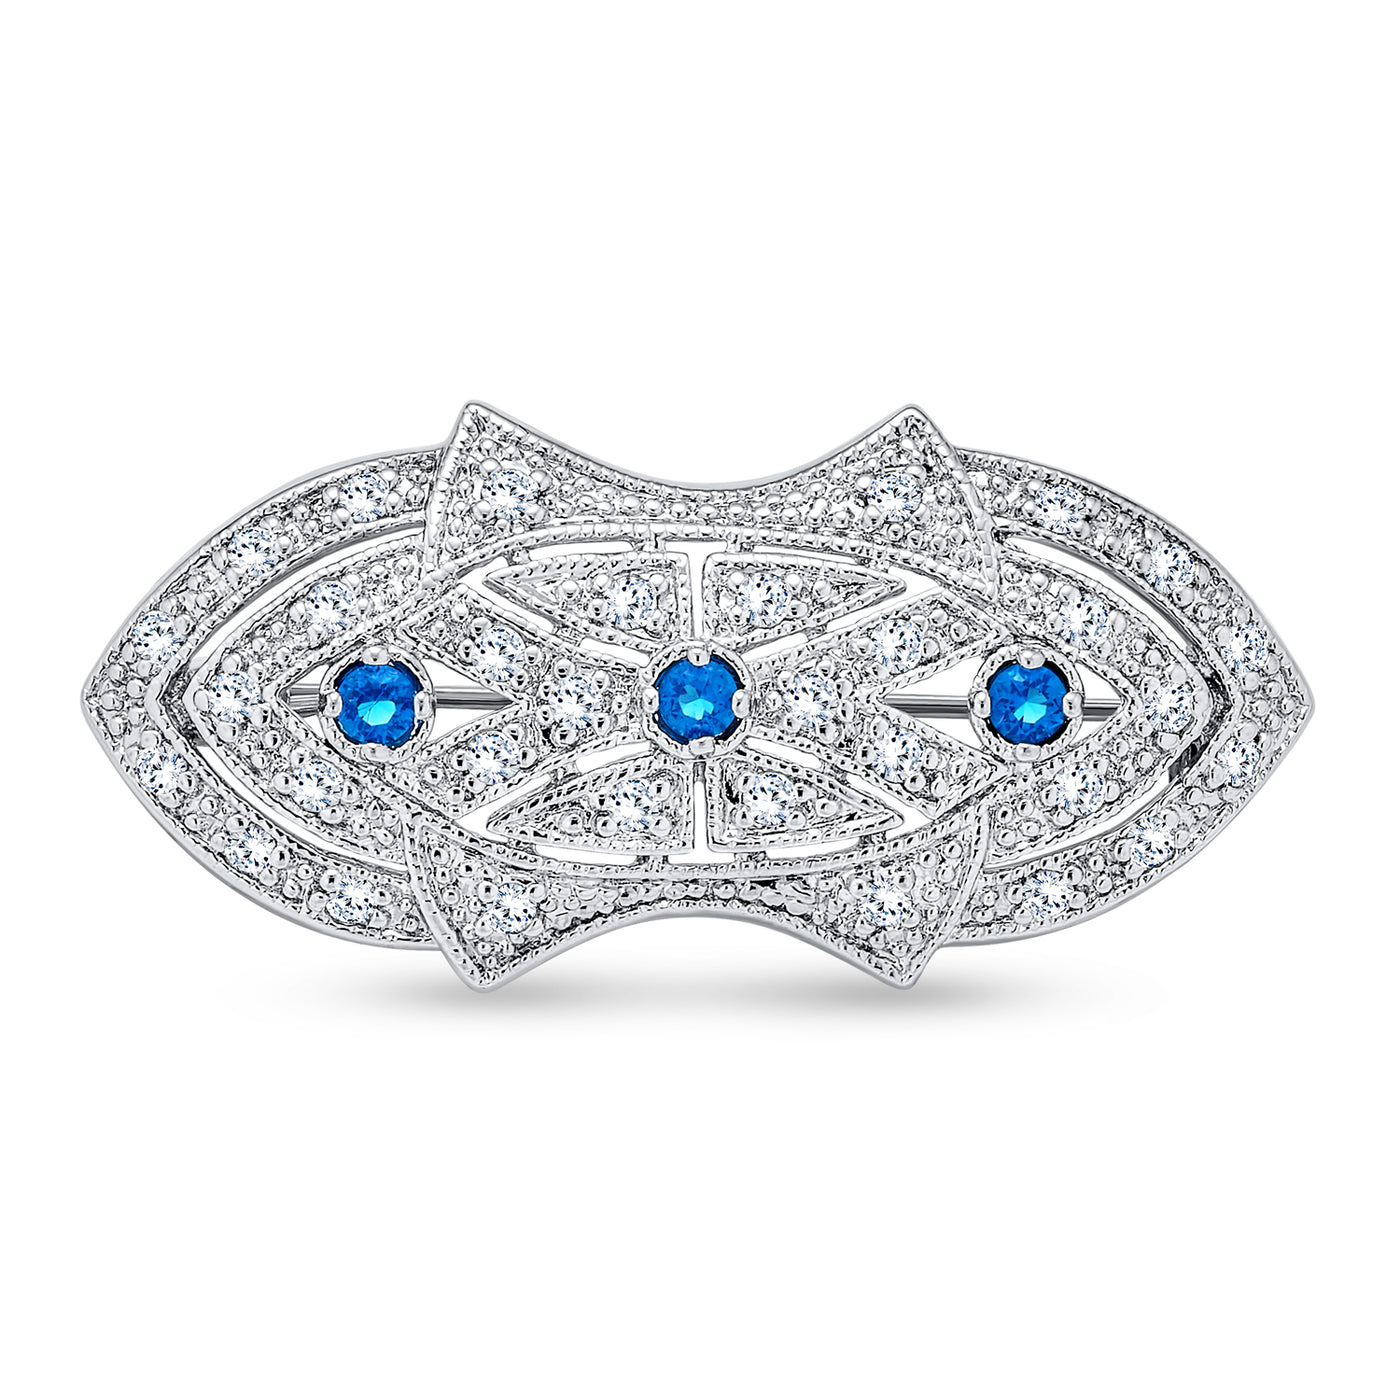 Art Deco Style Brooch Pin For Women Blue Clear CZ Imitation Sapphire